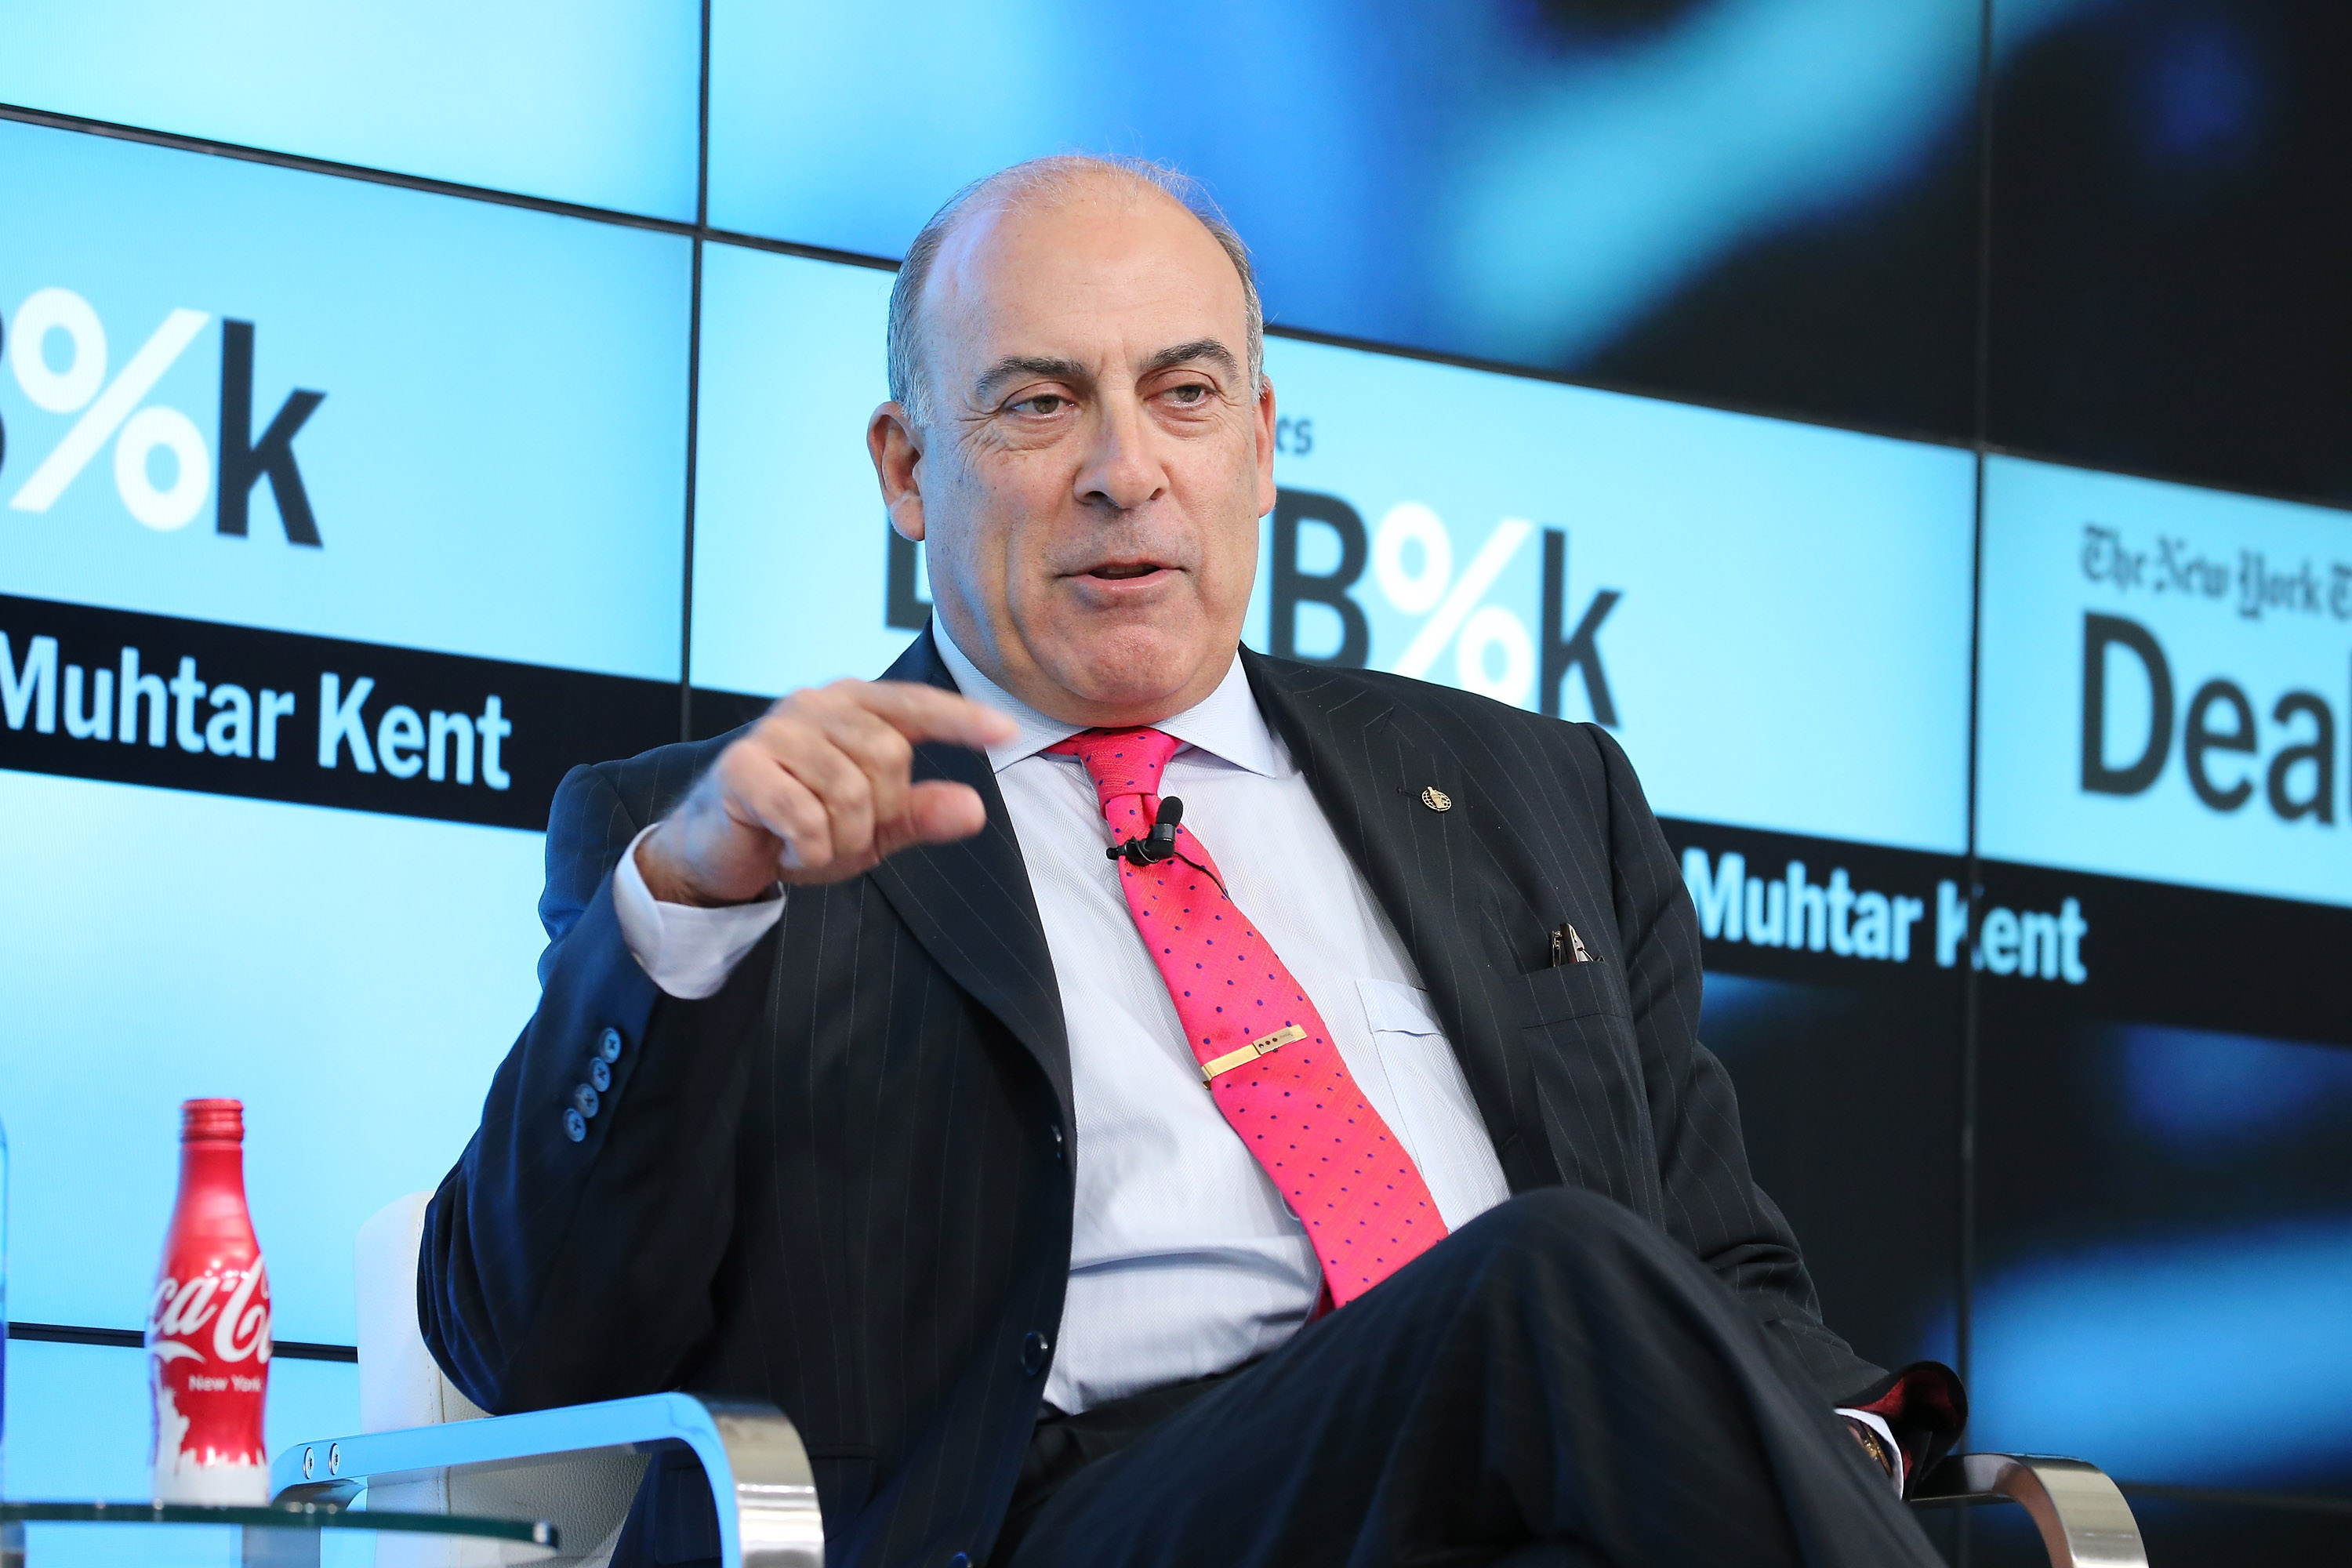 Chairman and CEO of The Coca-Cola Company Muhtar Kent participates in a panel discussion at the New York Times 2015 DealBook Conference at the Whitney Museum of American Art on November 3, 2015 in New York City.  (Neilson Barnard/Getty Images--New York Times) (Neilson Barnard&mdash;2015 Getty Images)